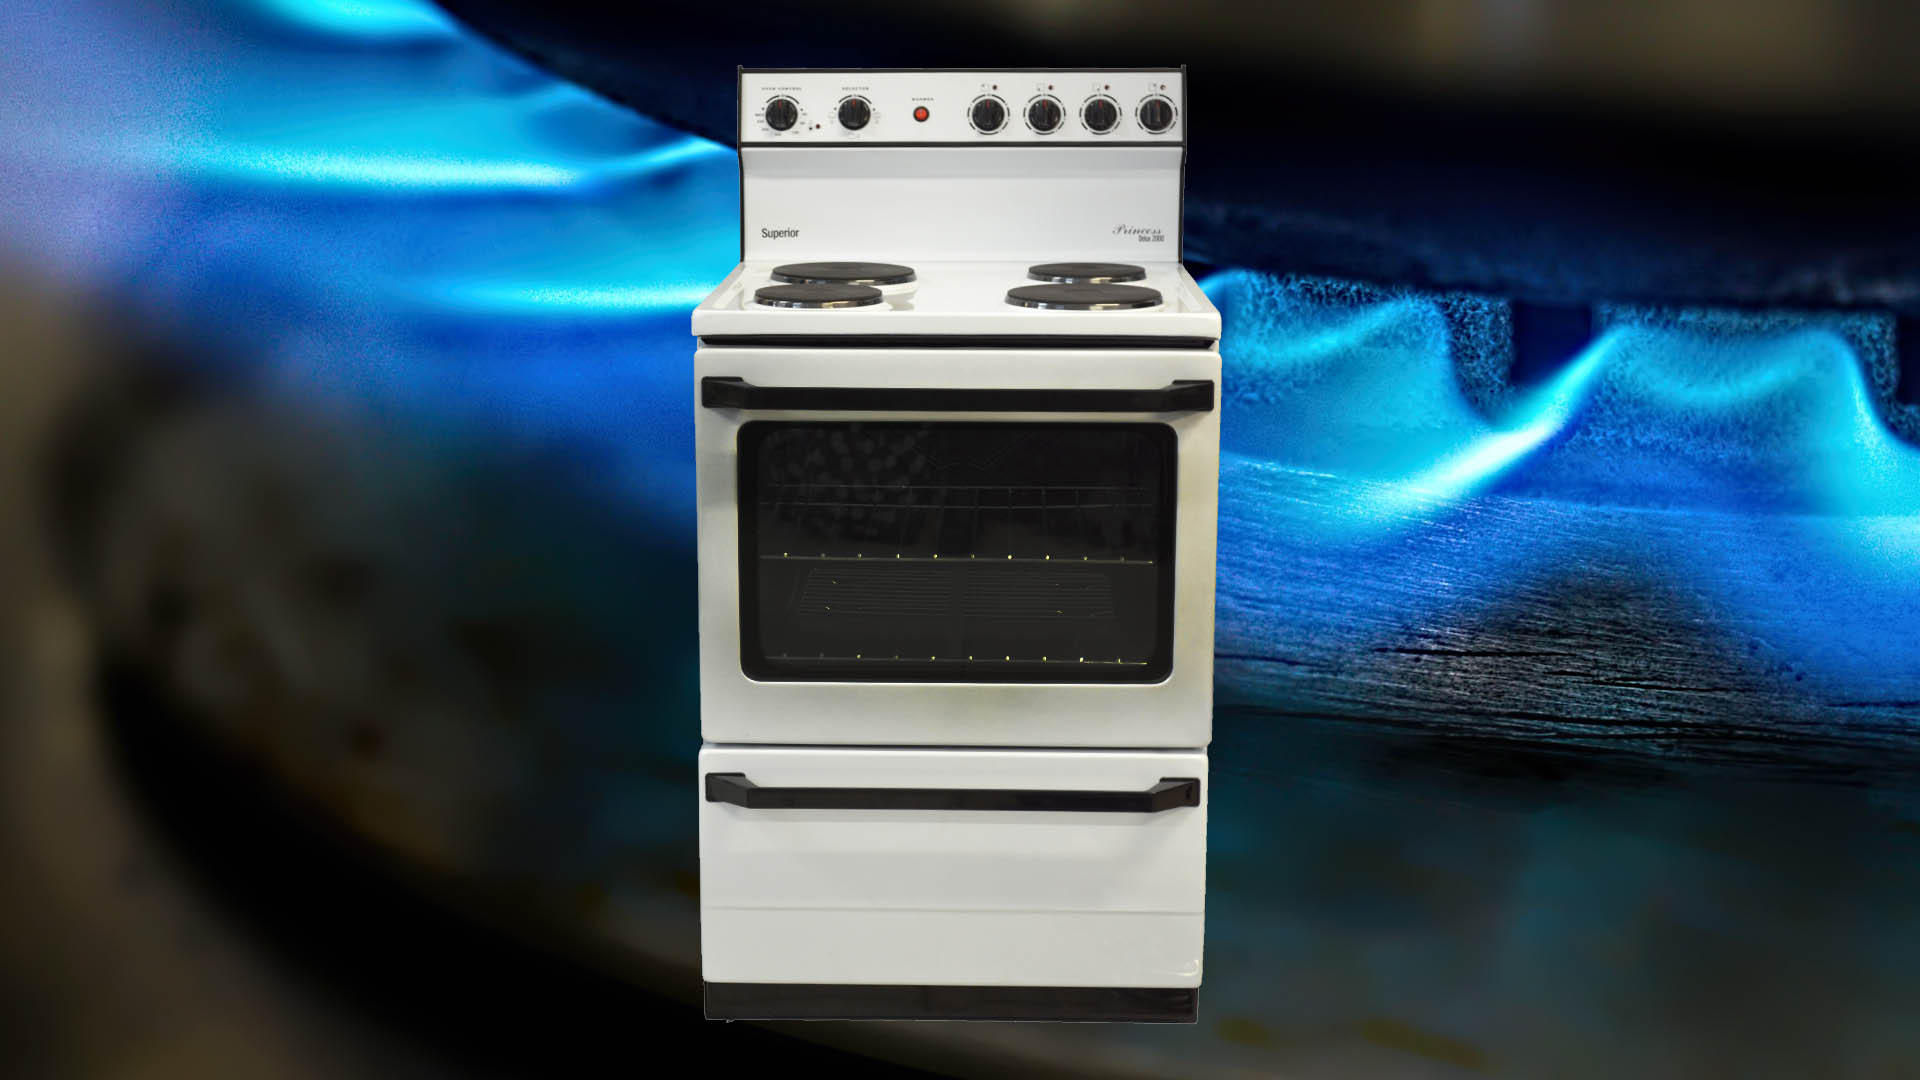 We stock a variety of Major Appliances